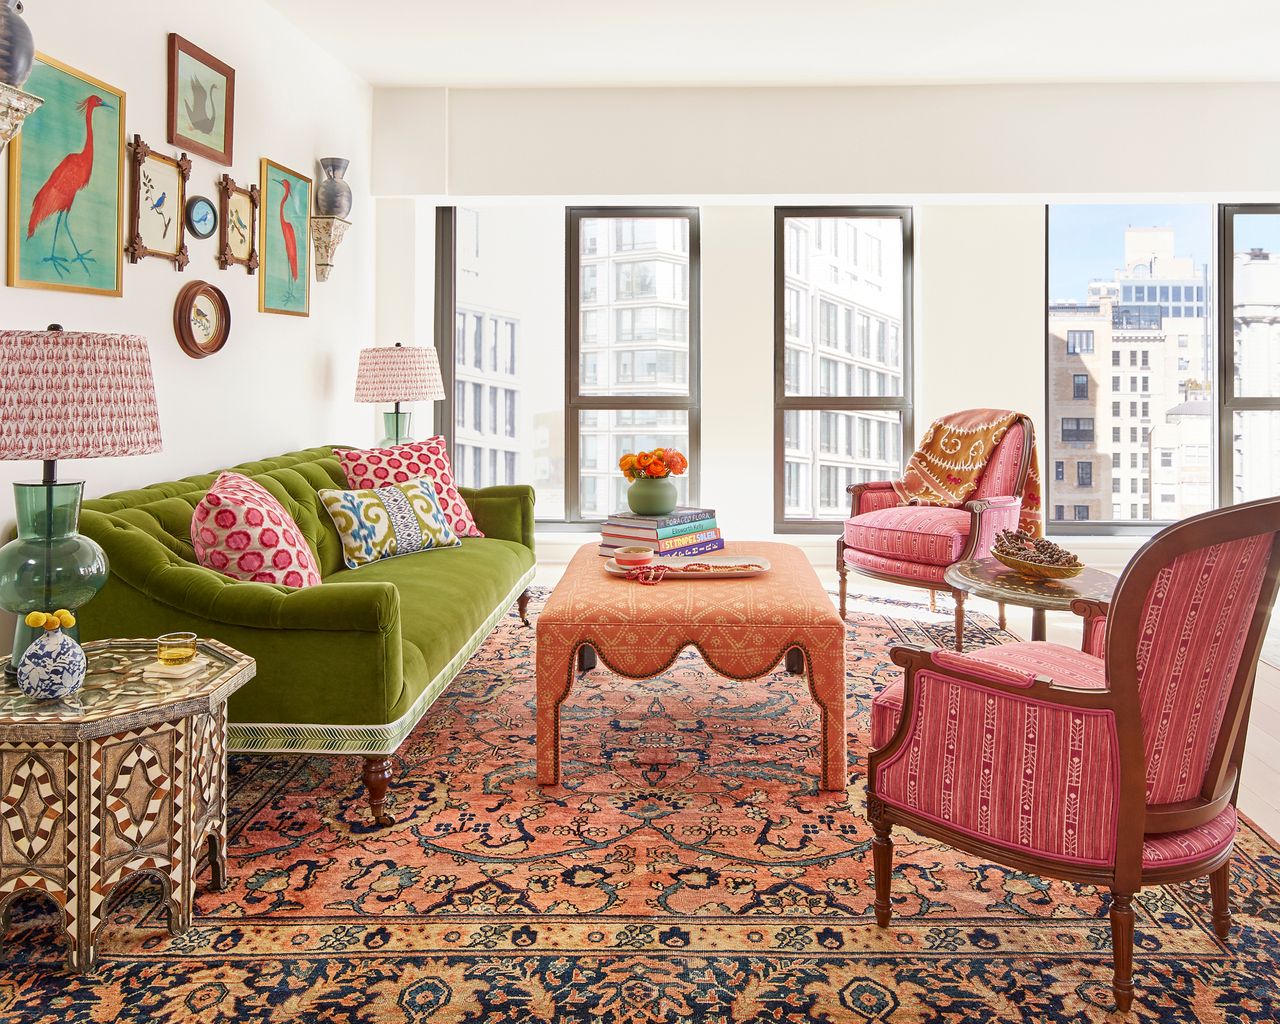 This NY condo showcases color, pattern and eclectic pieces